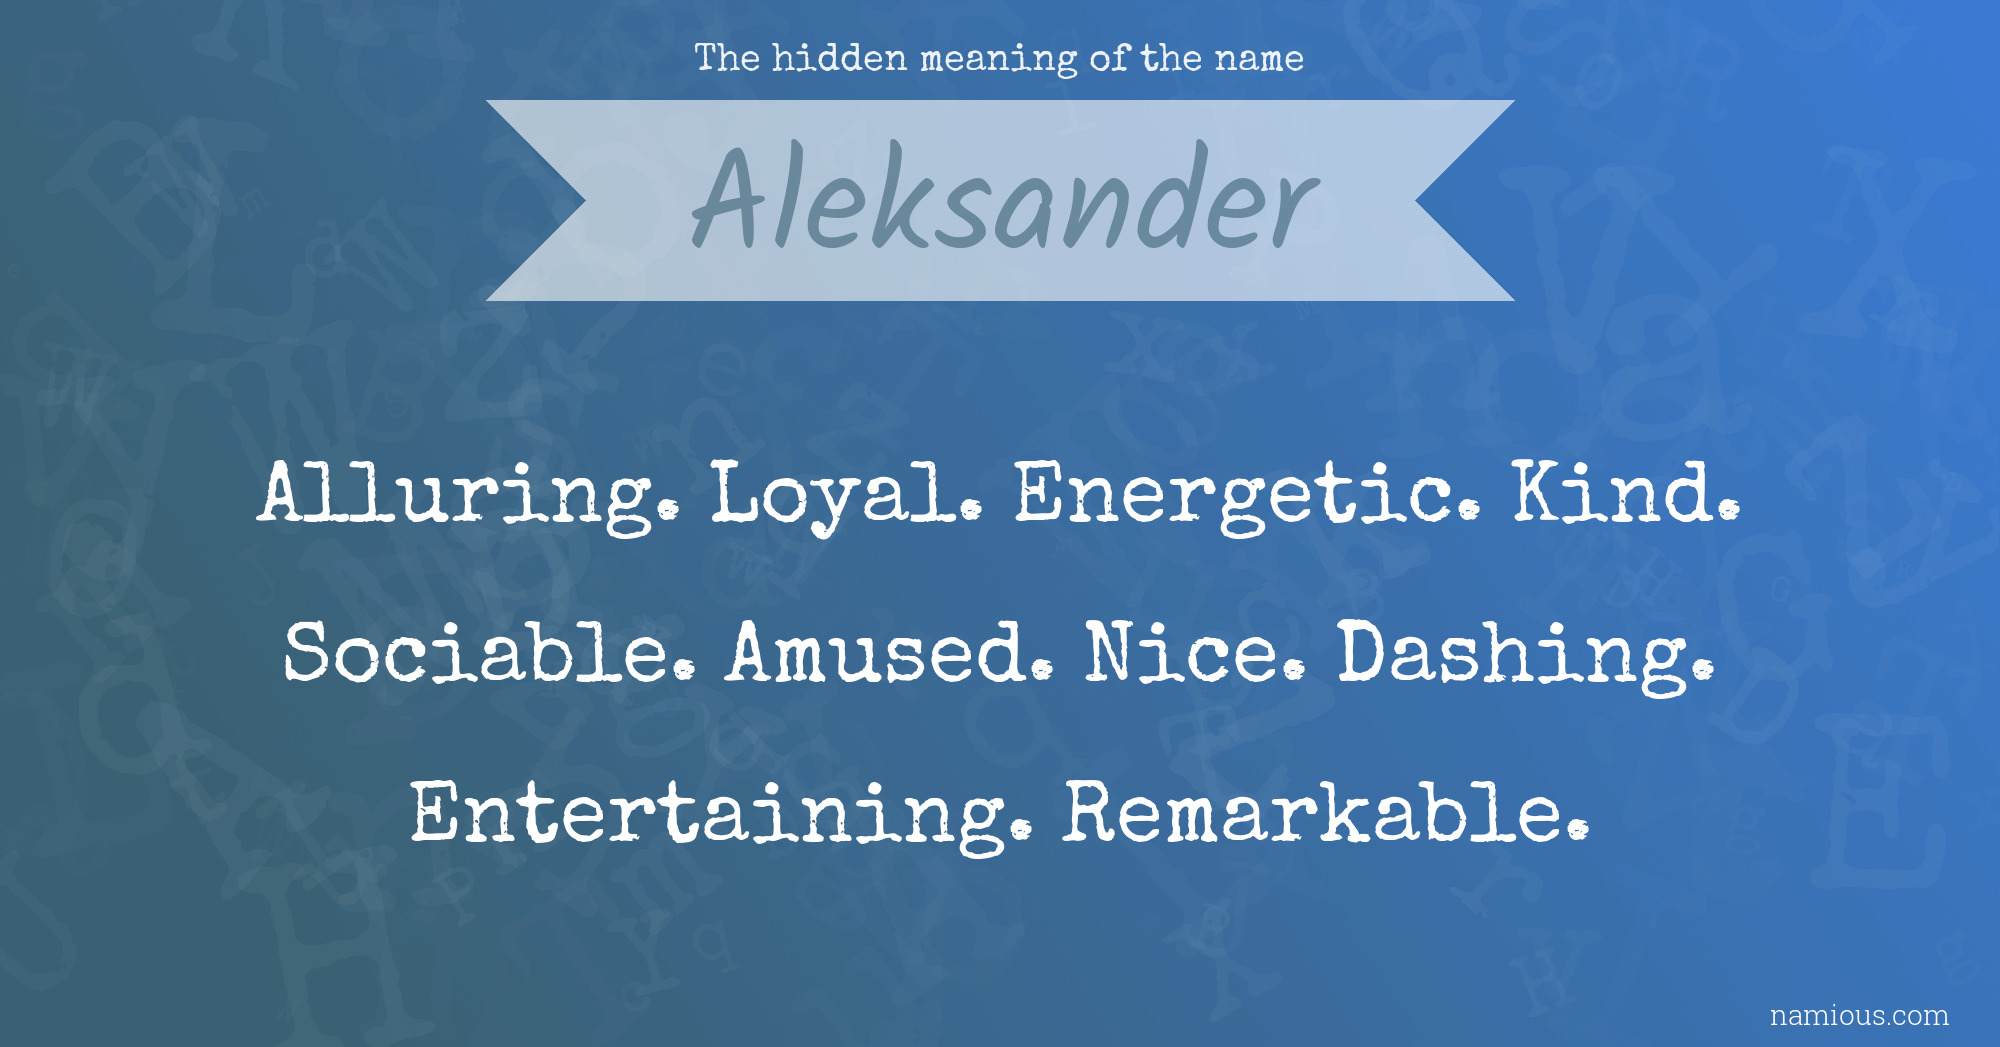 The hidden meaning of the name Aleksander